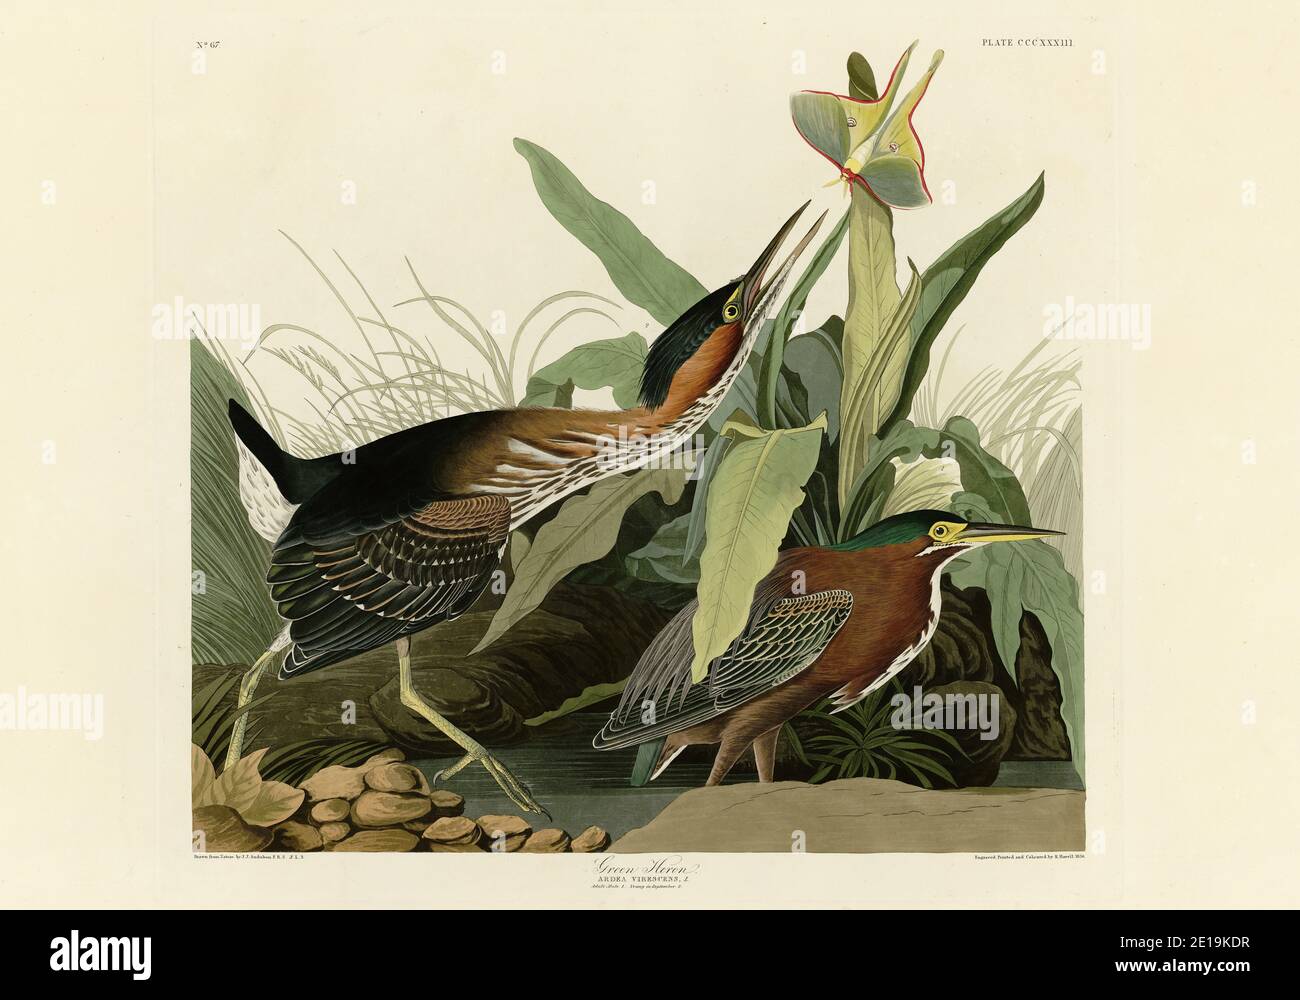 Plate 333 Green Heron from The Birds of America folio (1827–1839) by John James Audubon, Very high resolution and quality edited image Stock Photo